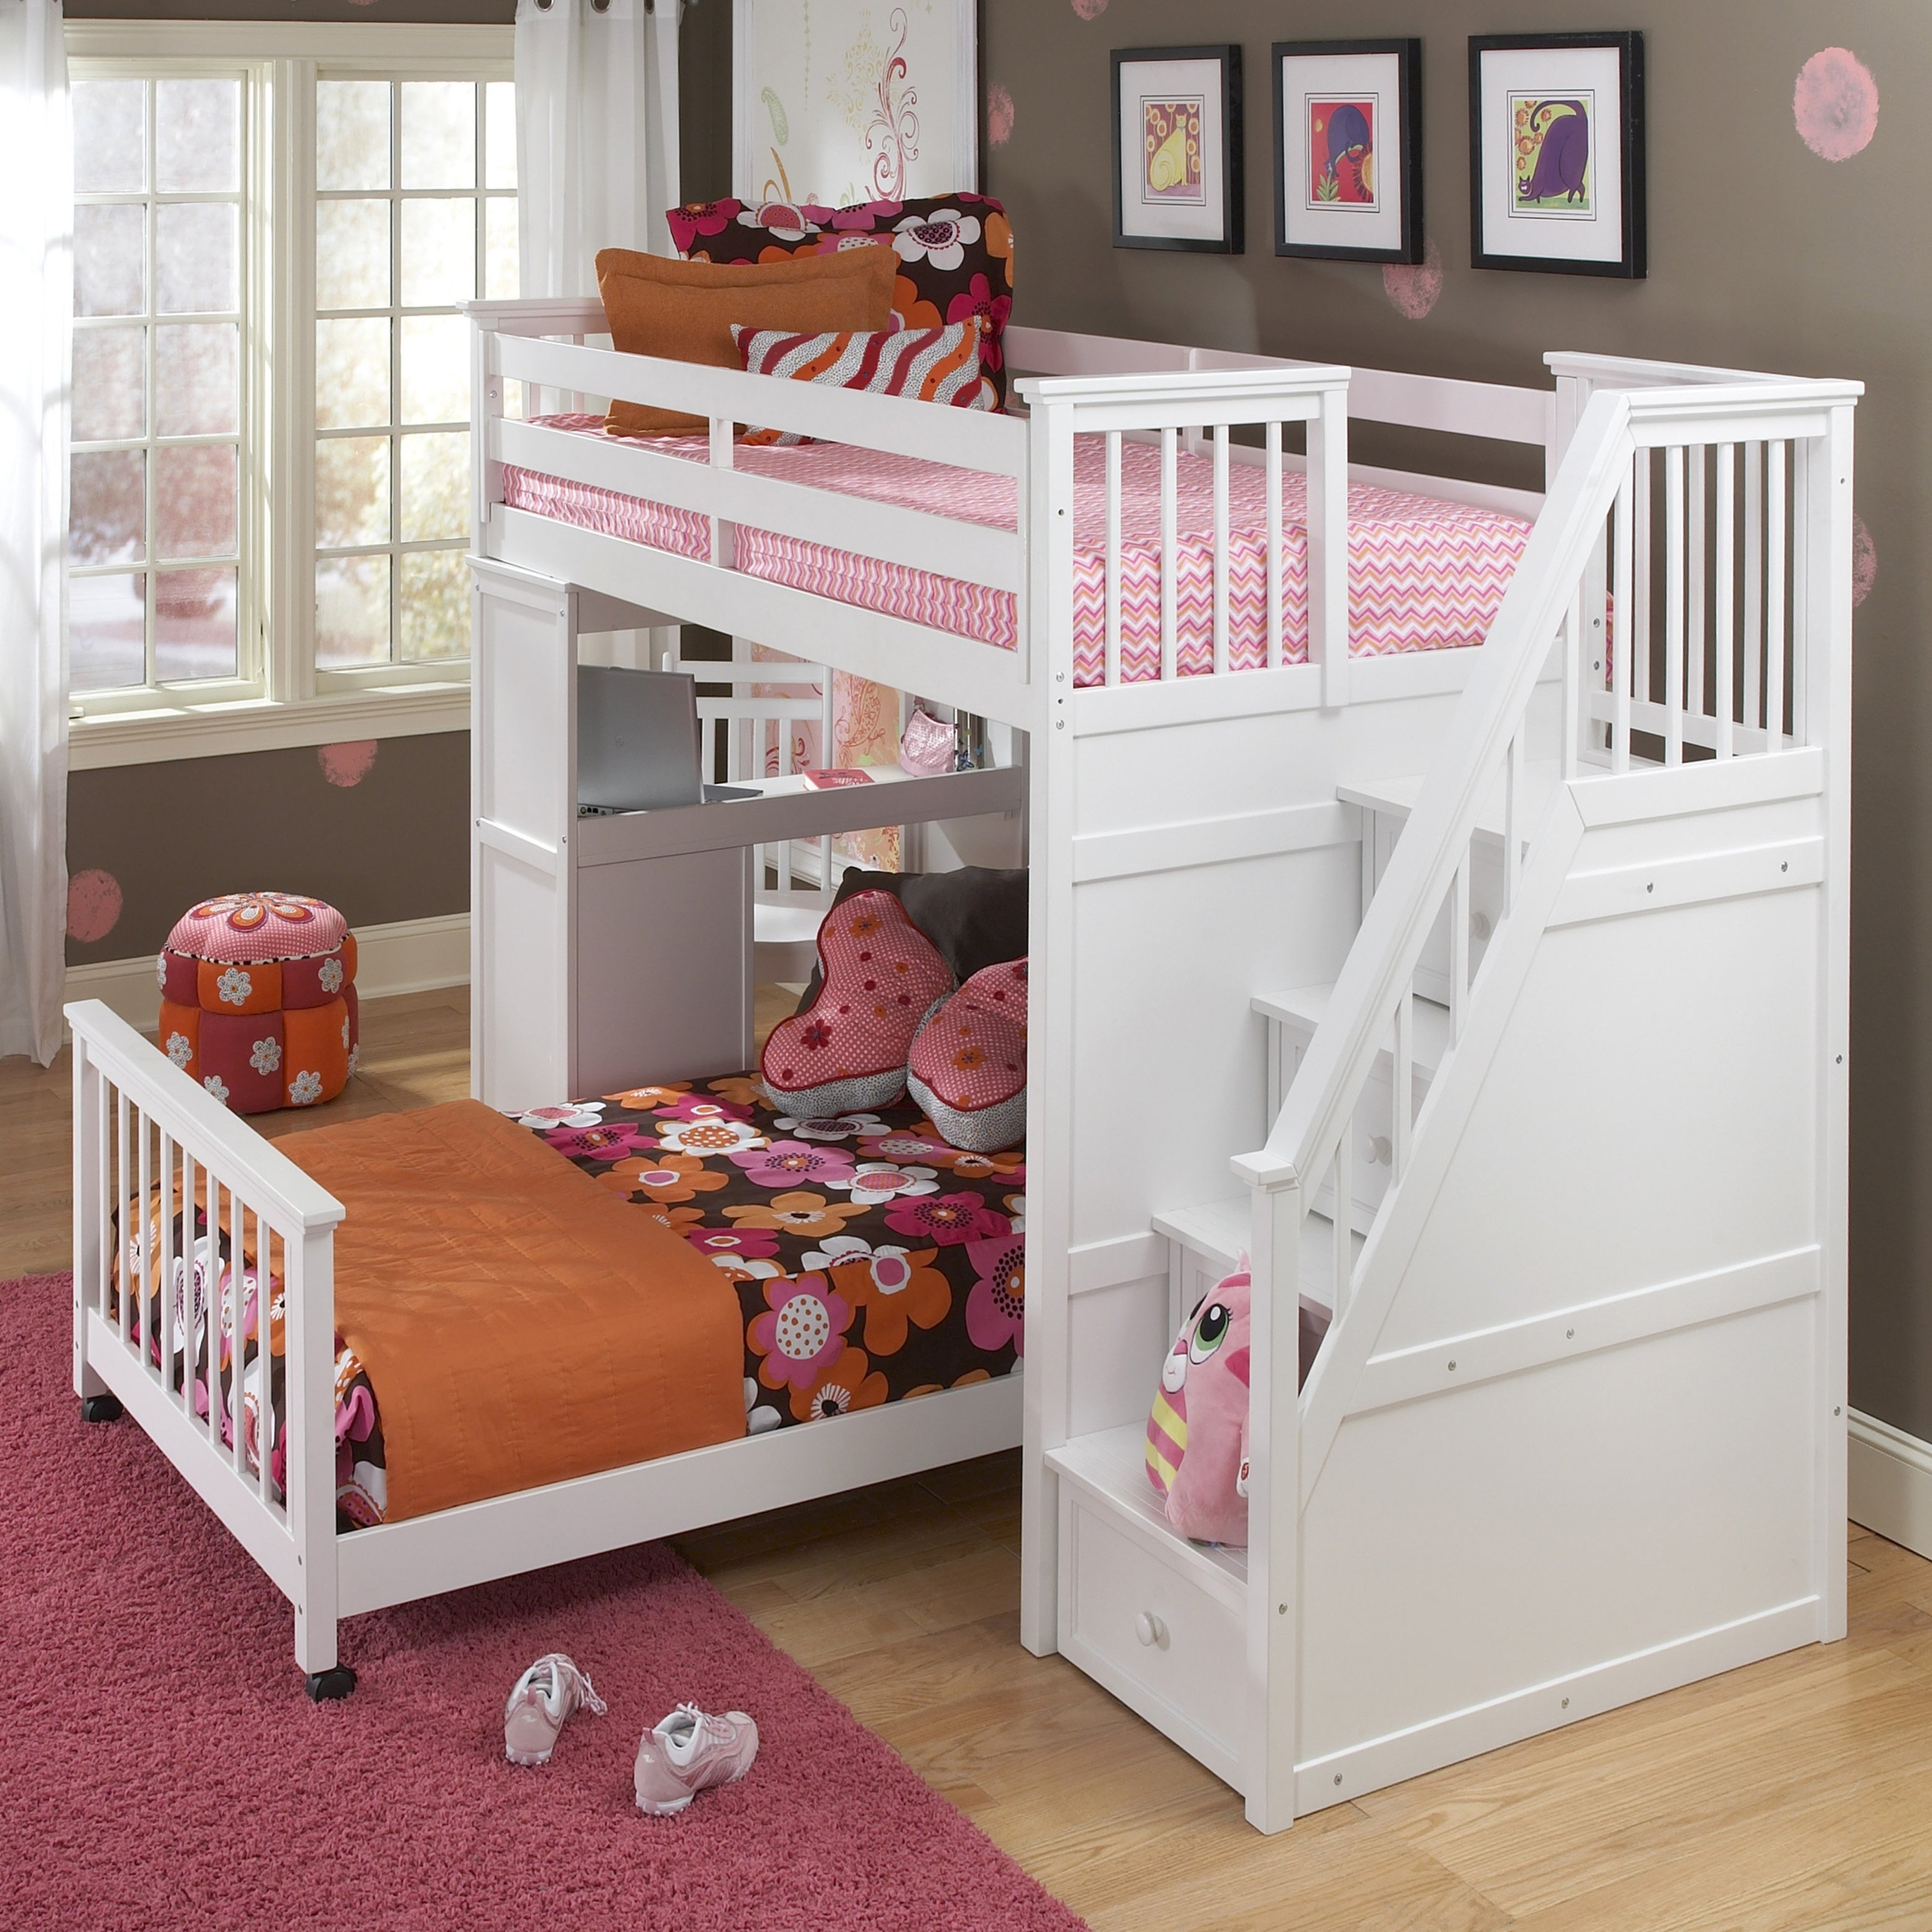 Bunk beds for girls twin over full choosing white bunk